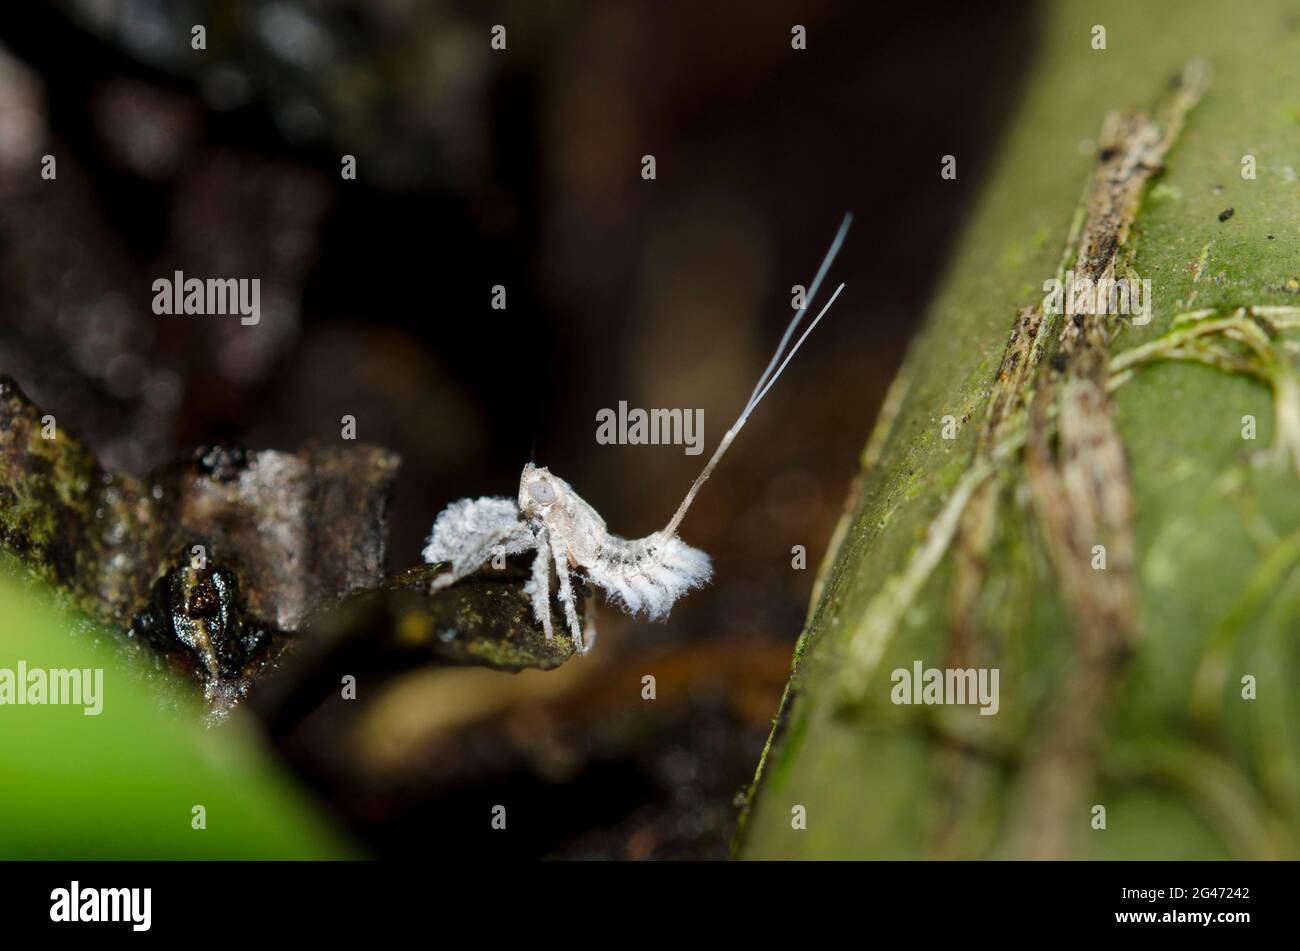 Fulgoroid Planthopper, Lophopidae Family, nymph with waxy extrusions for camouflage, Saba, Bali, Indonesia Stock Photo